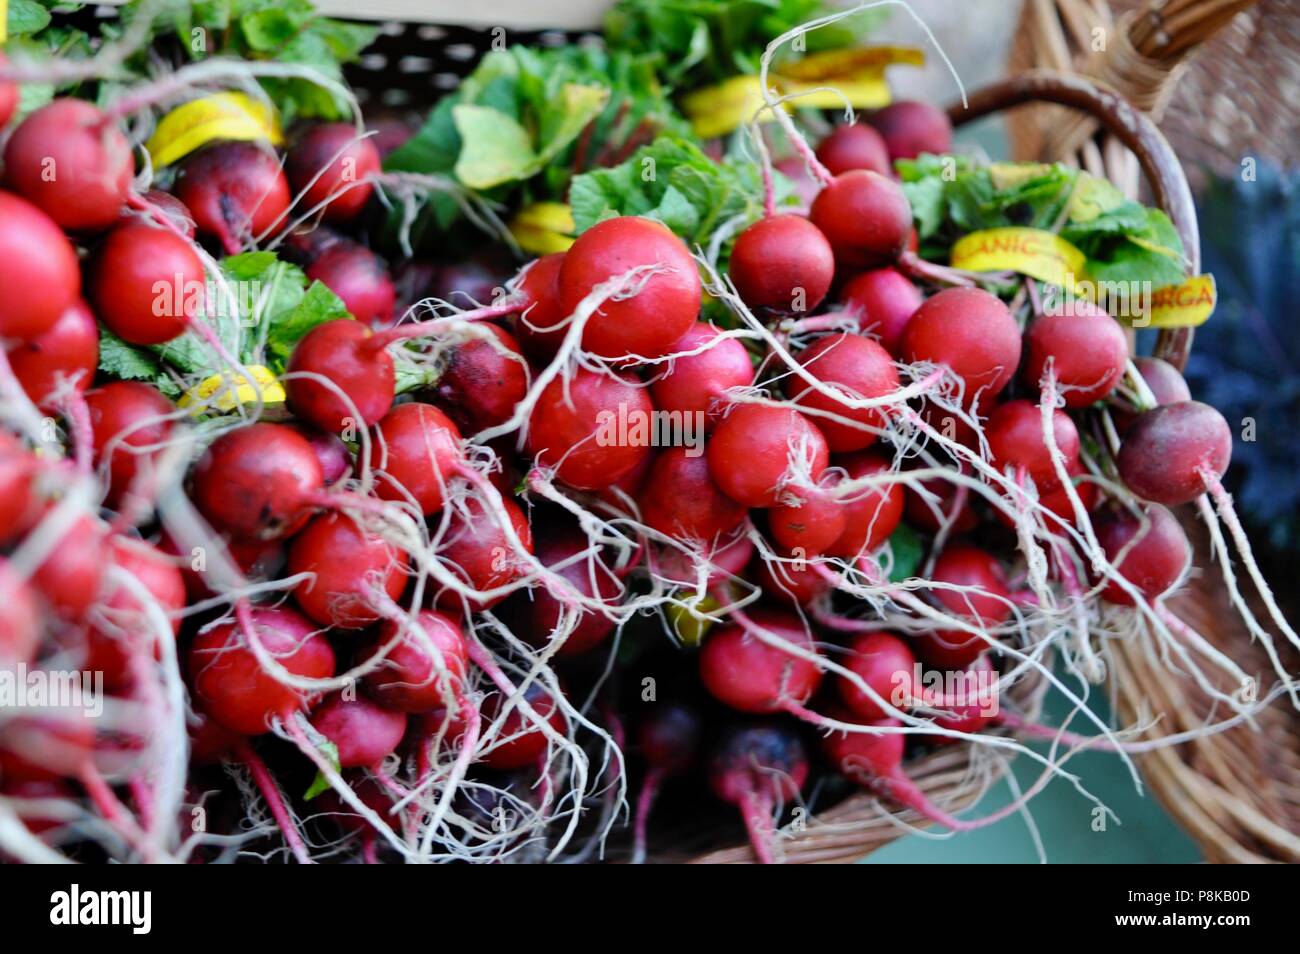 11 Types of Radishes You'll See at the Farmers Market This Year – Produce  Pack